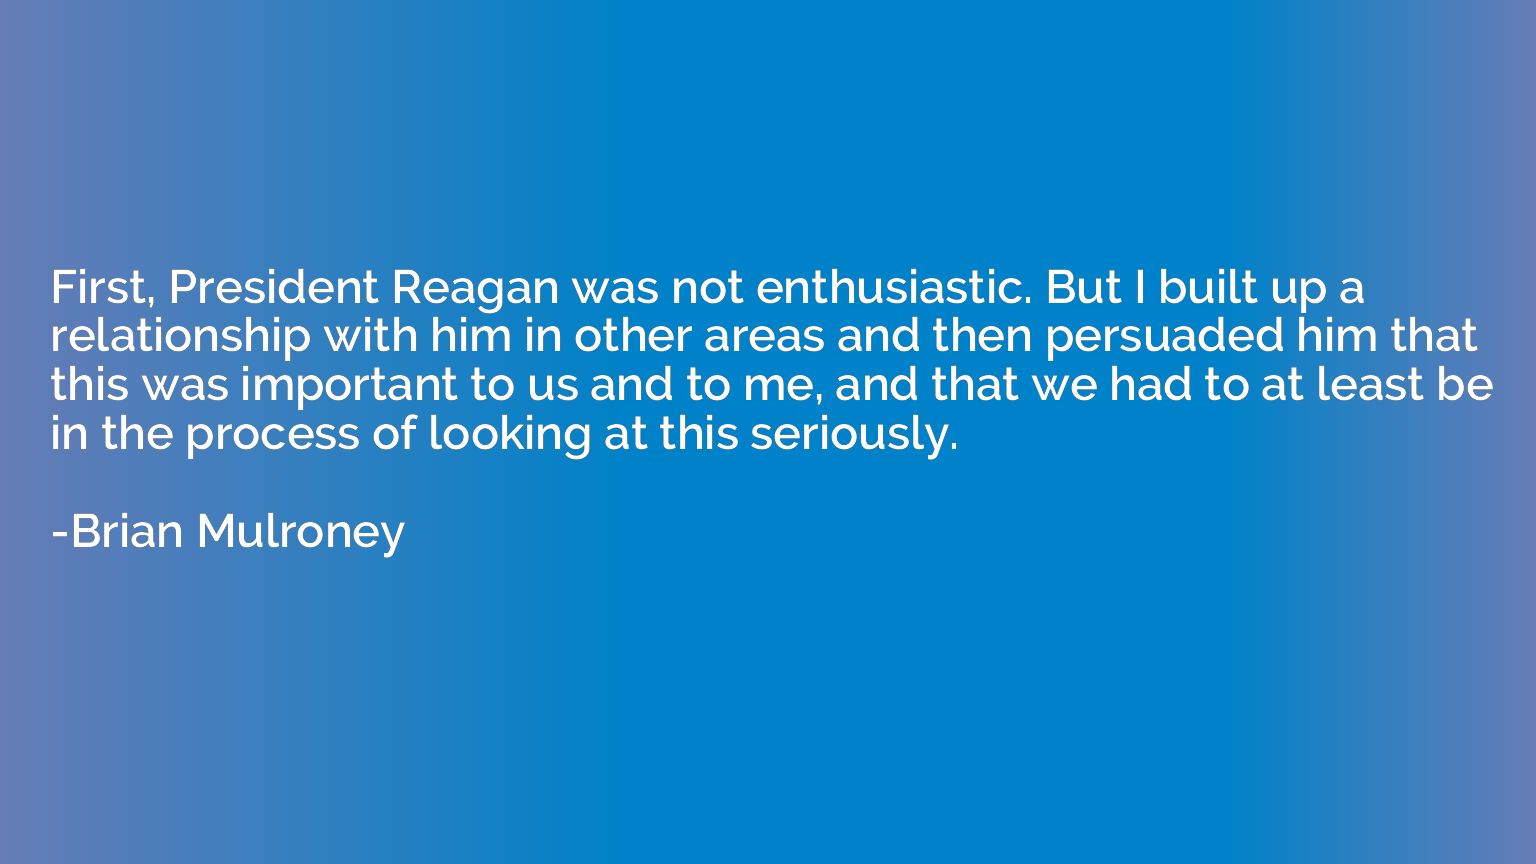 First, President Reagan was not enthusiastic. But I built up